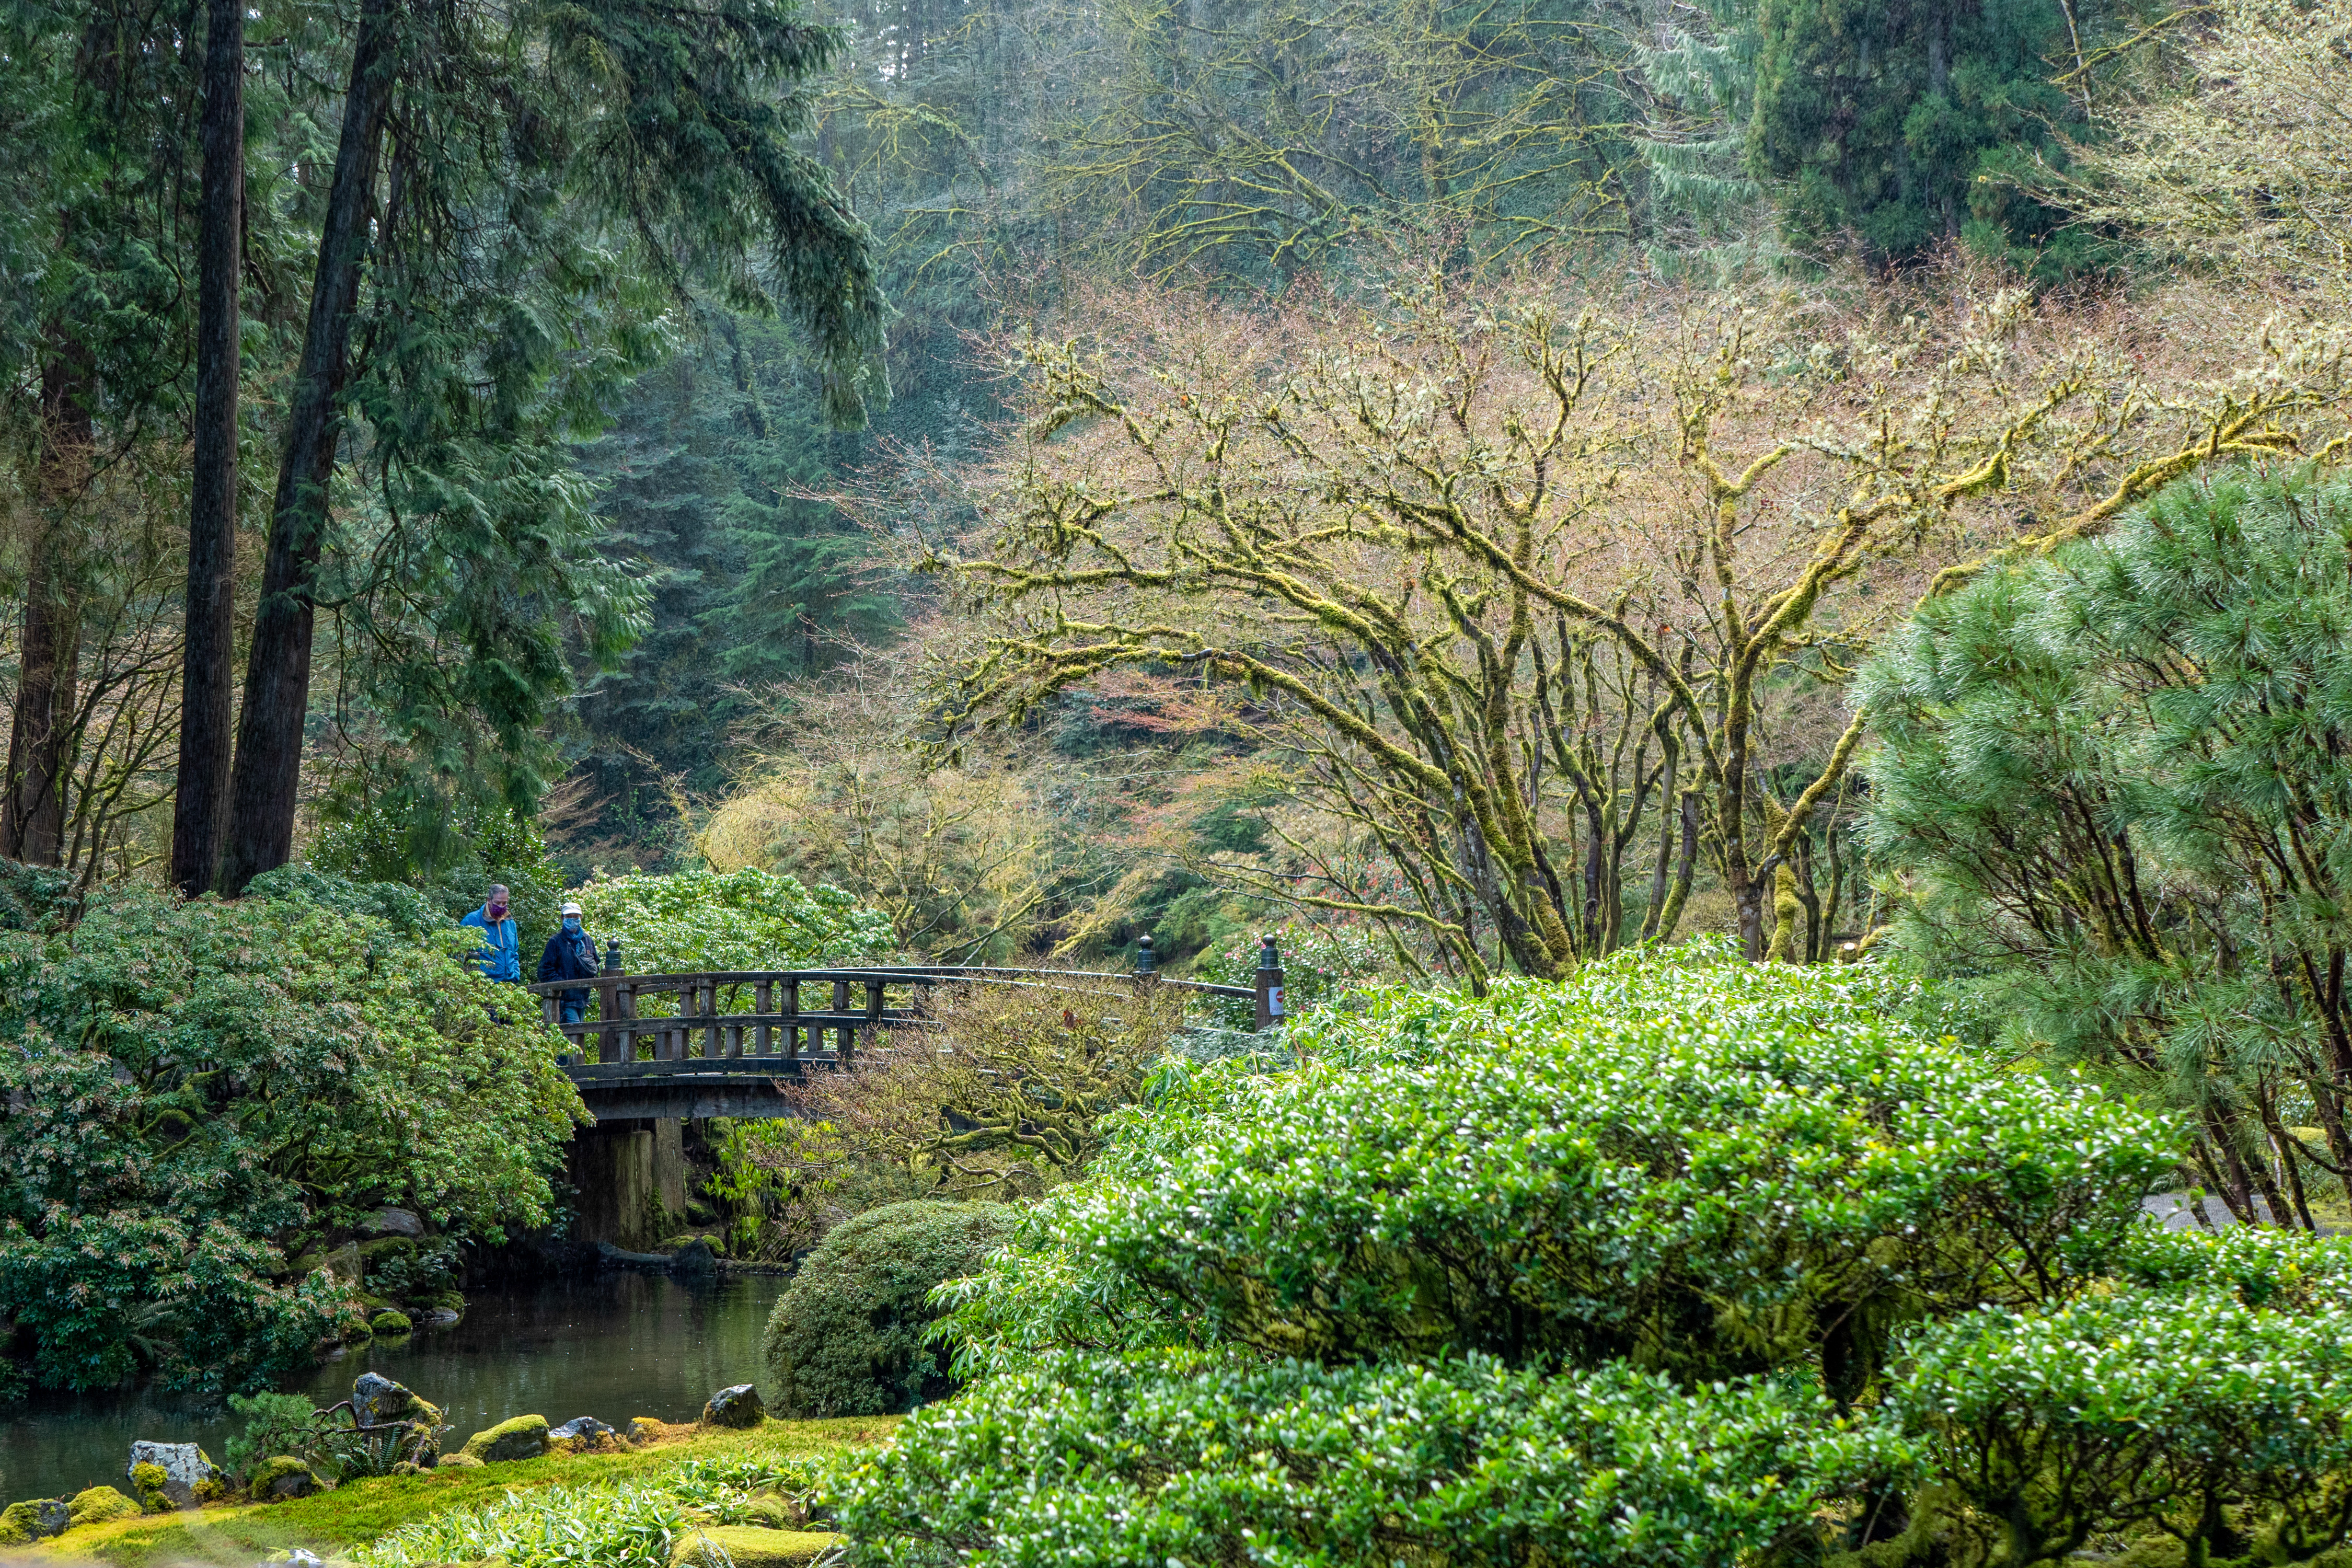 Exploring the Portland Japanese Garden is a must-do when visiting this city